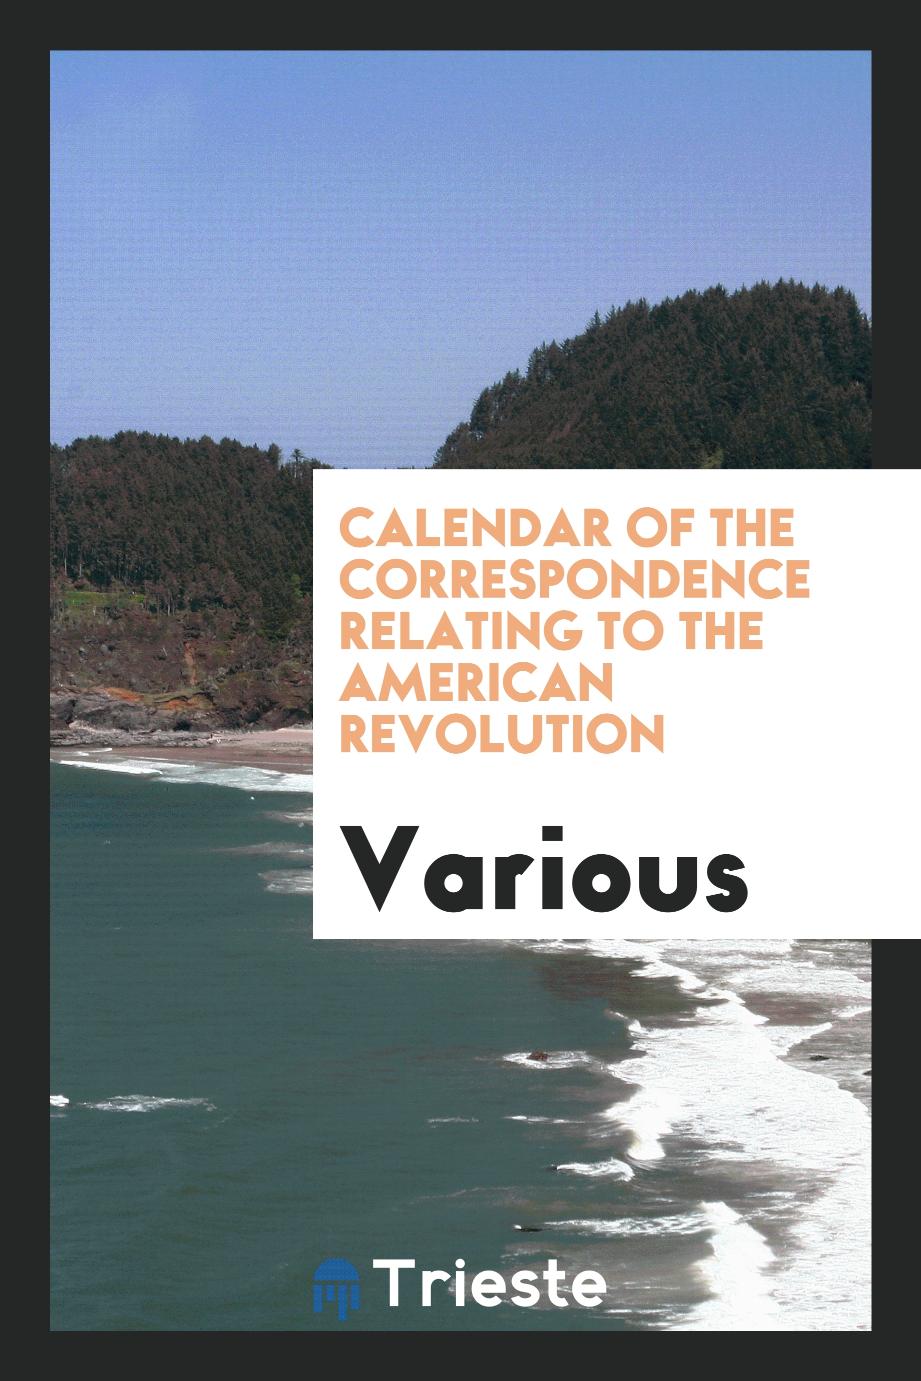 Calendar of the correspondence relating to the American Revolution